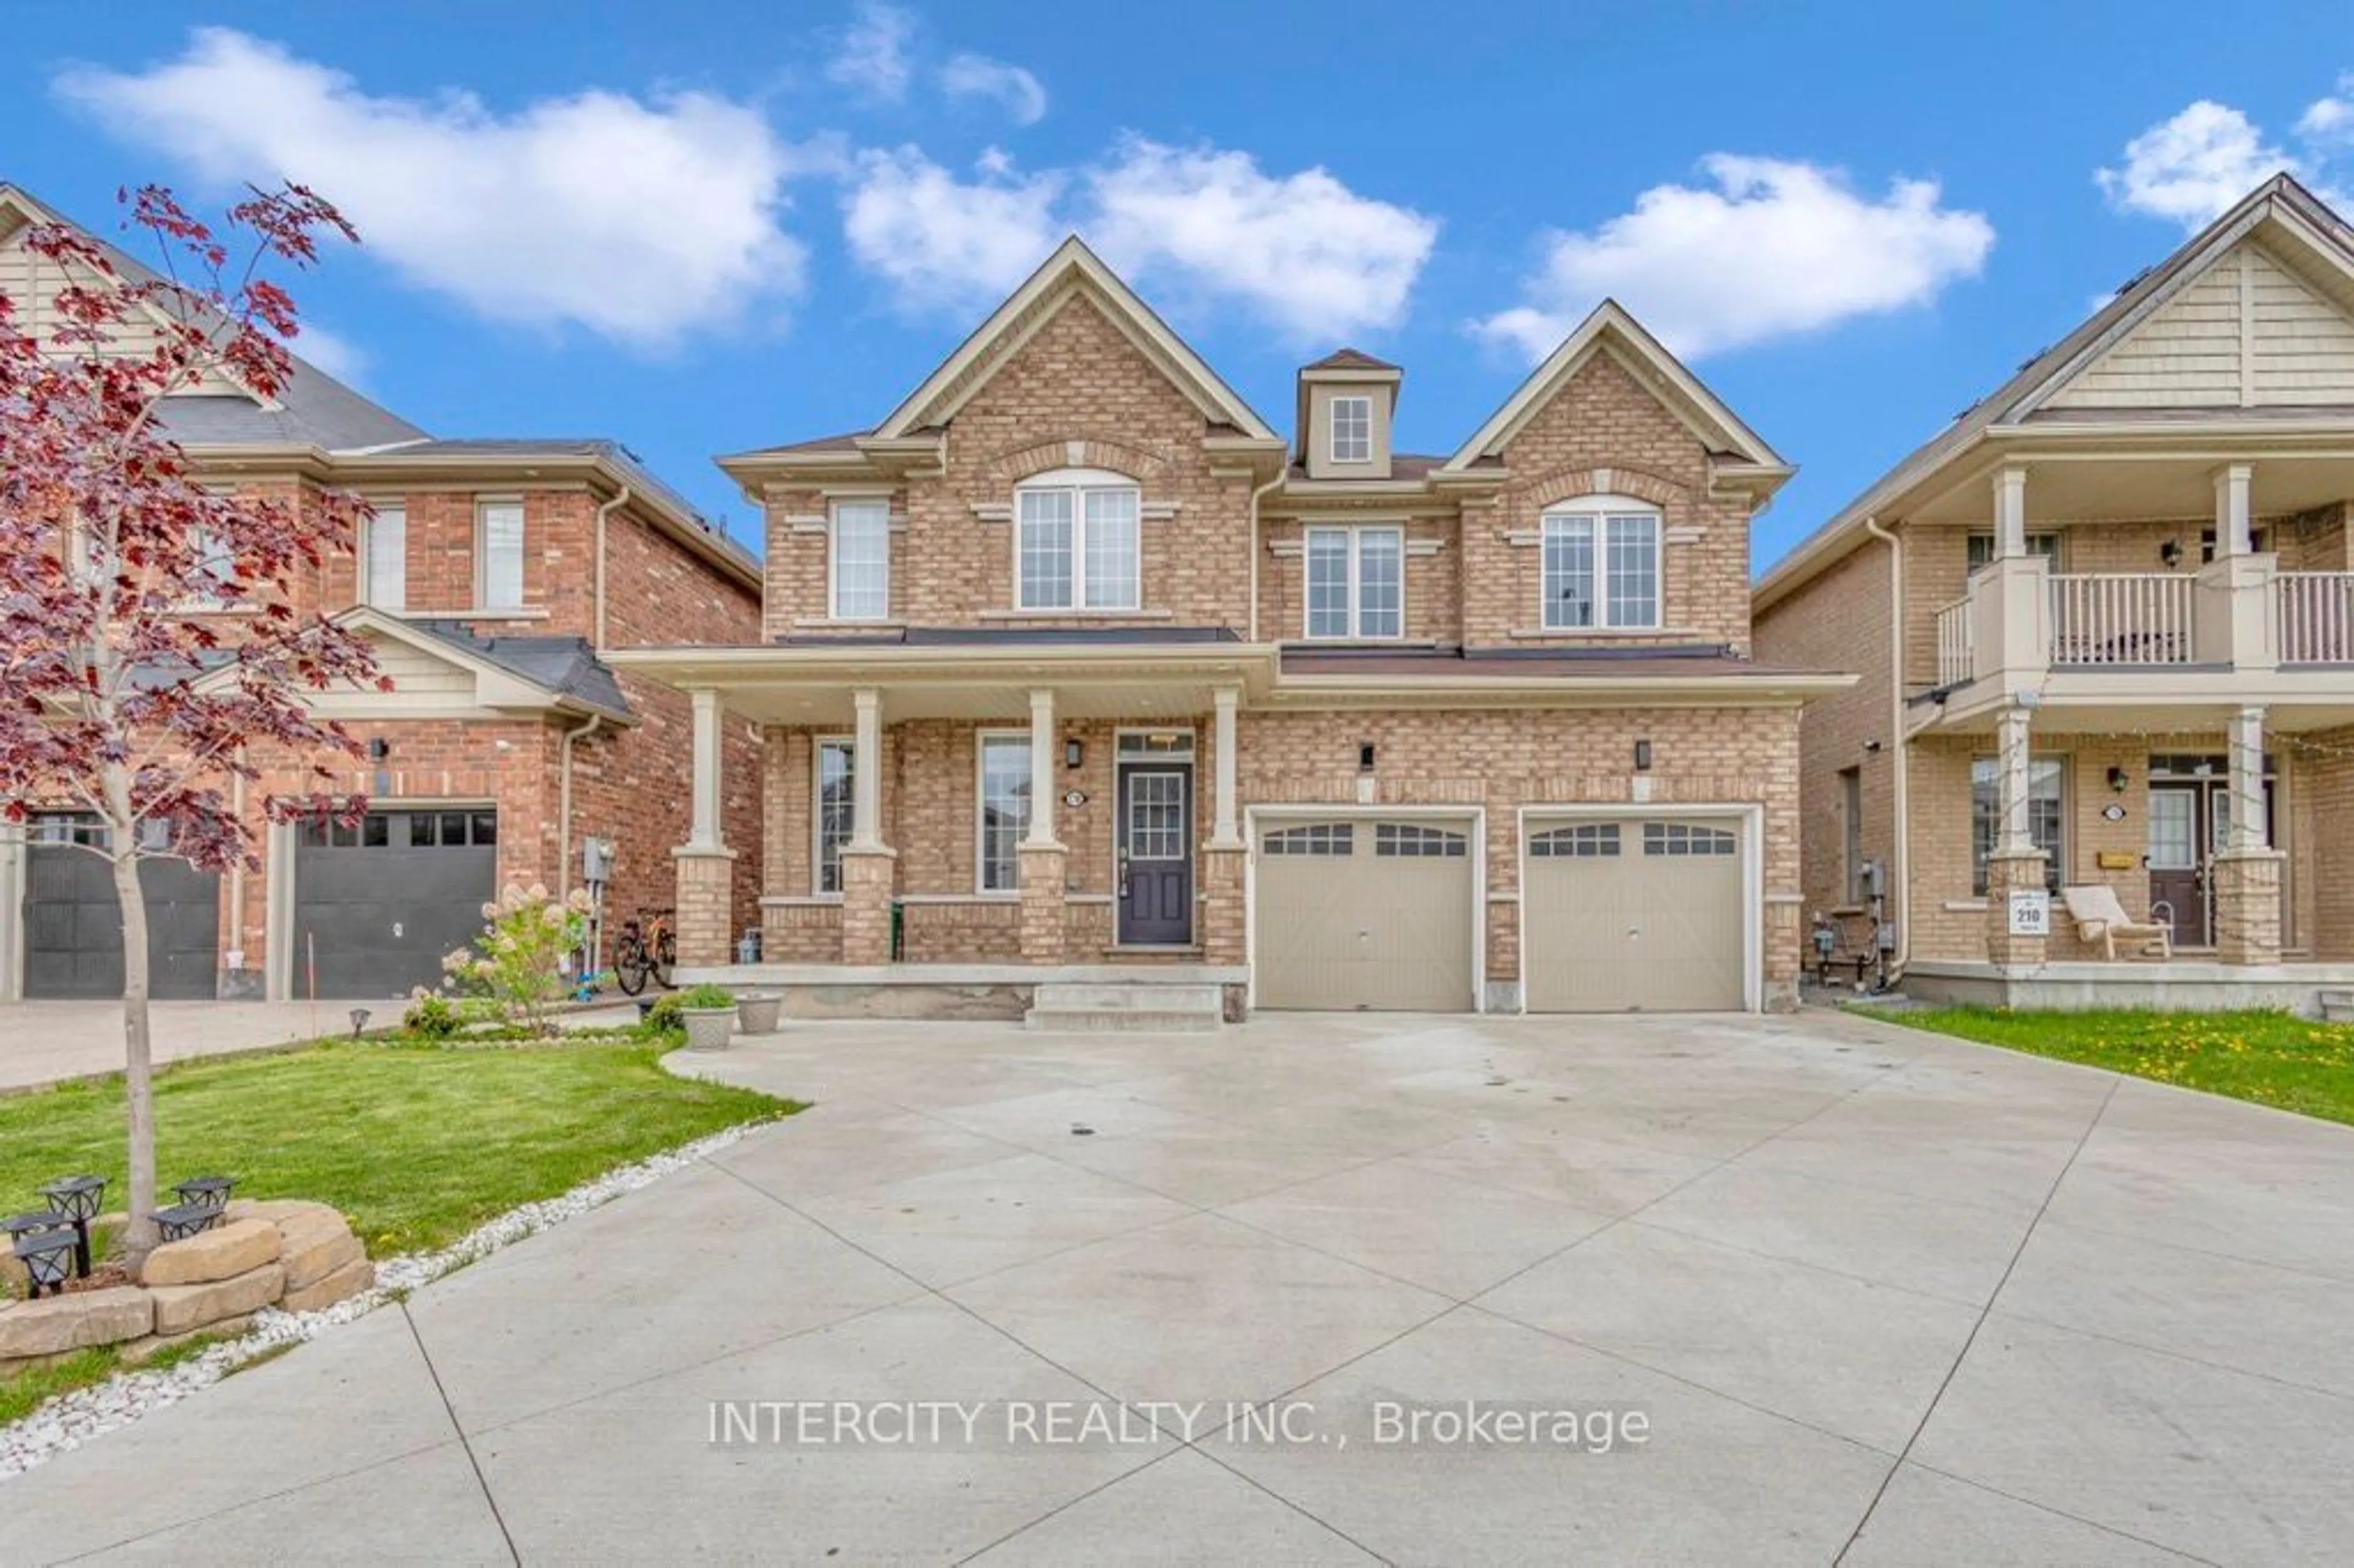 Home with brick exterior material for 7700 Black Maple Dr, Niagara Falls Ontario L2H 2Y6